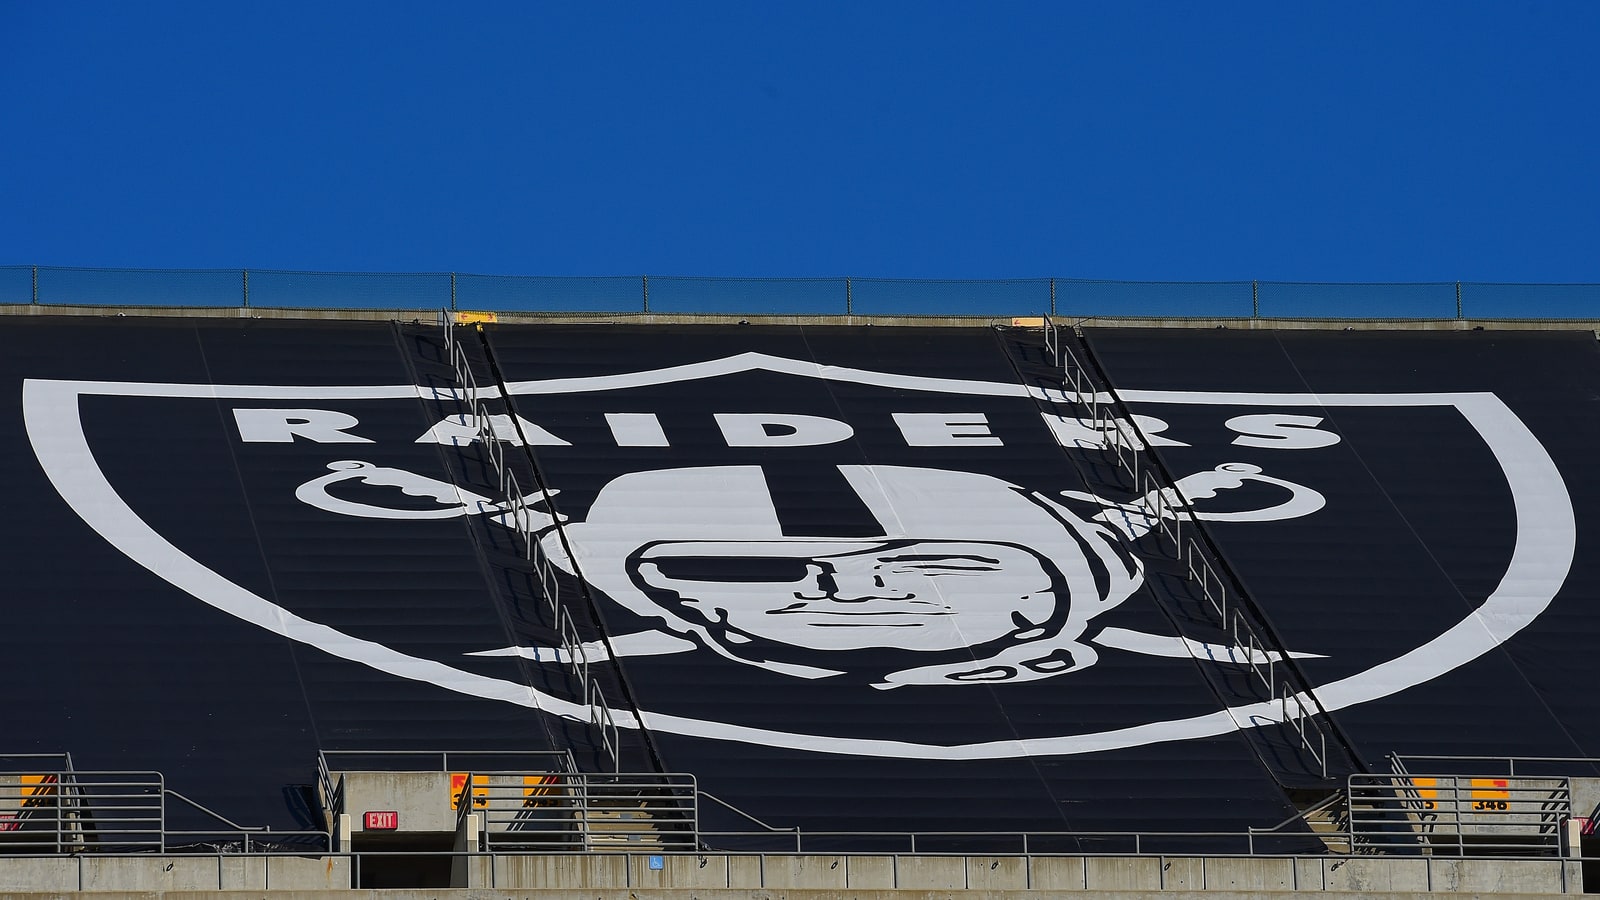 Raiders' past image playing a role in NFL's relocation decision